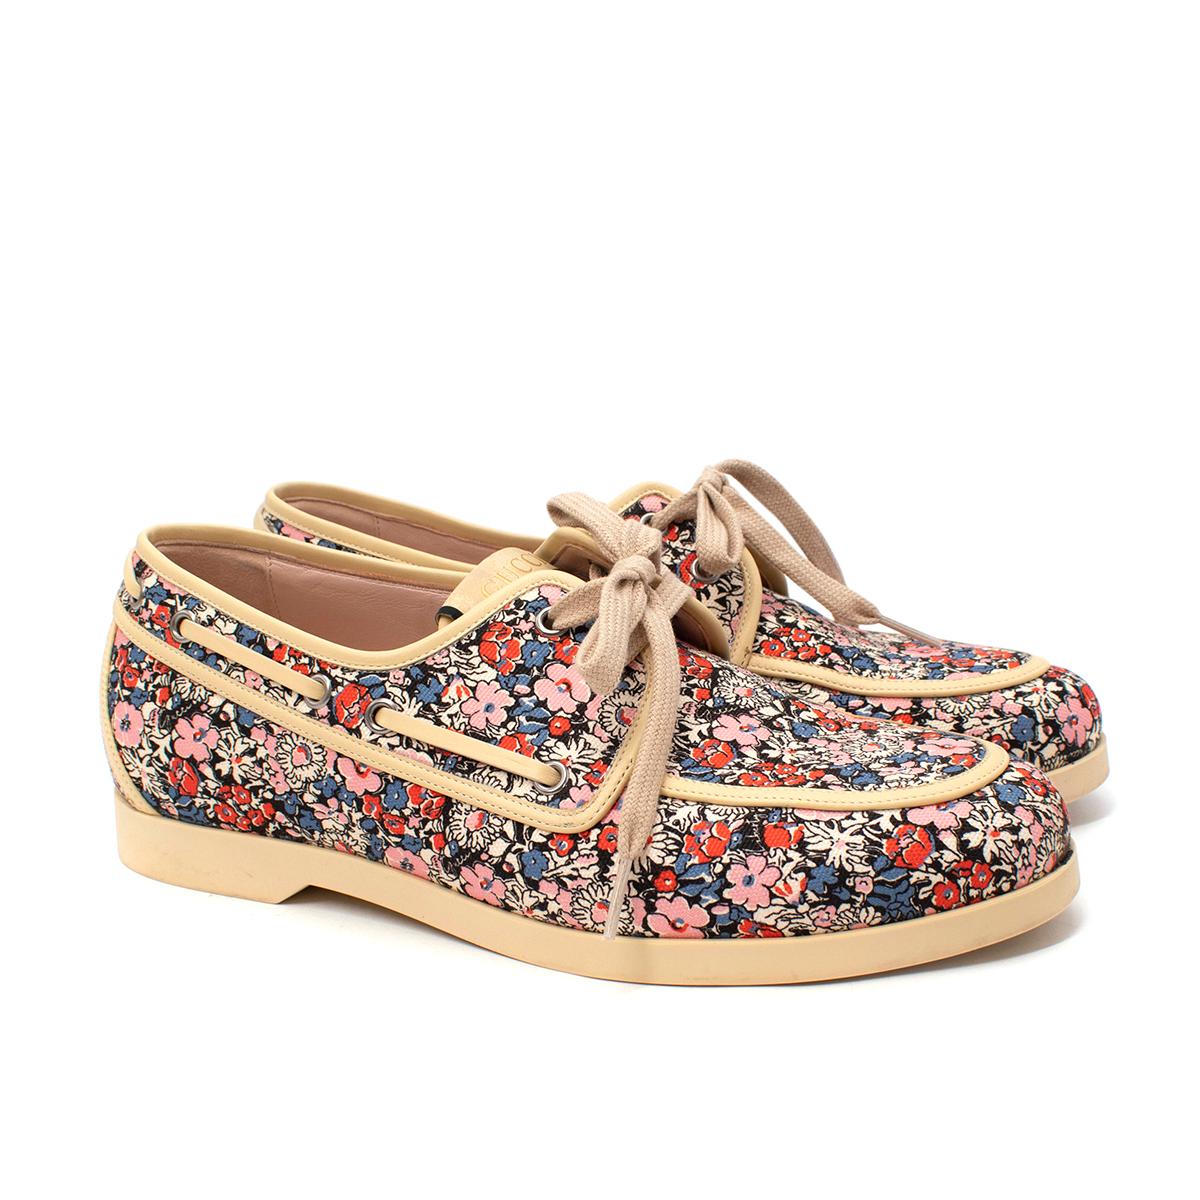  Gucci Liberty Floral Deck Shoes
 

 - Part of a 2020 collaboration between the Italian house and Iconic London shop, known for their printed fabrics
 - Small ditzy floral in tones of red, pink, blue & ivory, contrasted with a cream rubber sole, and